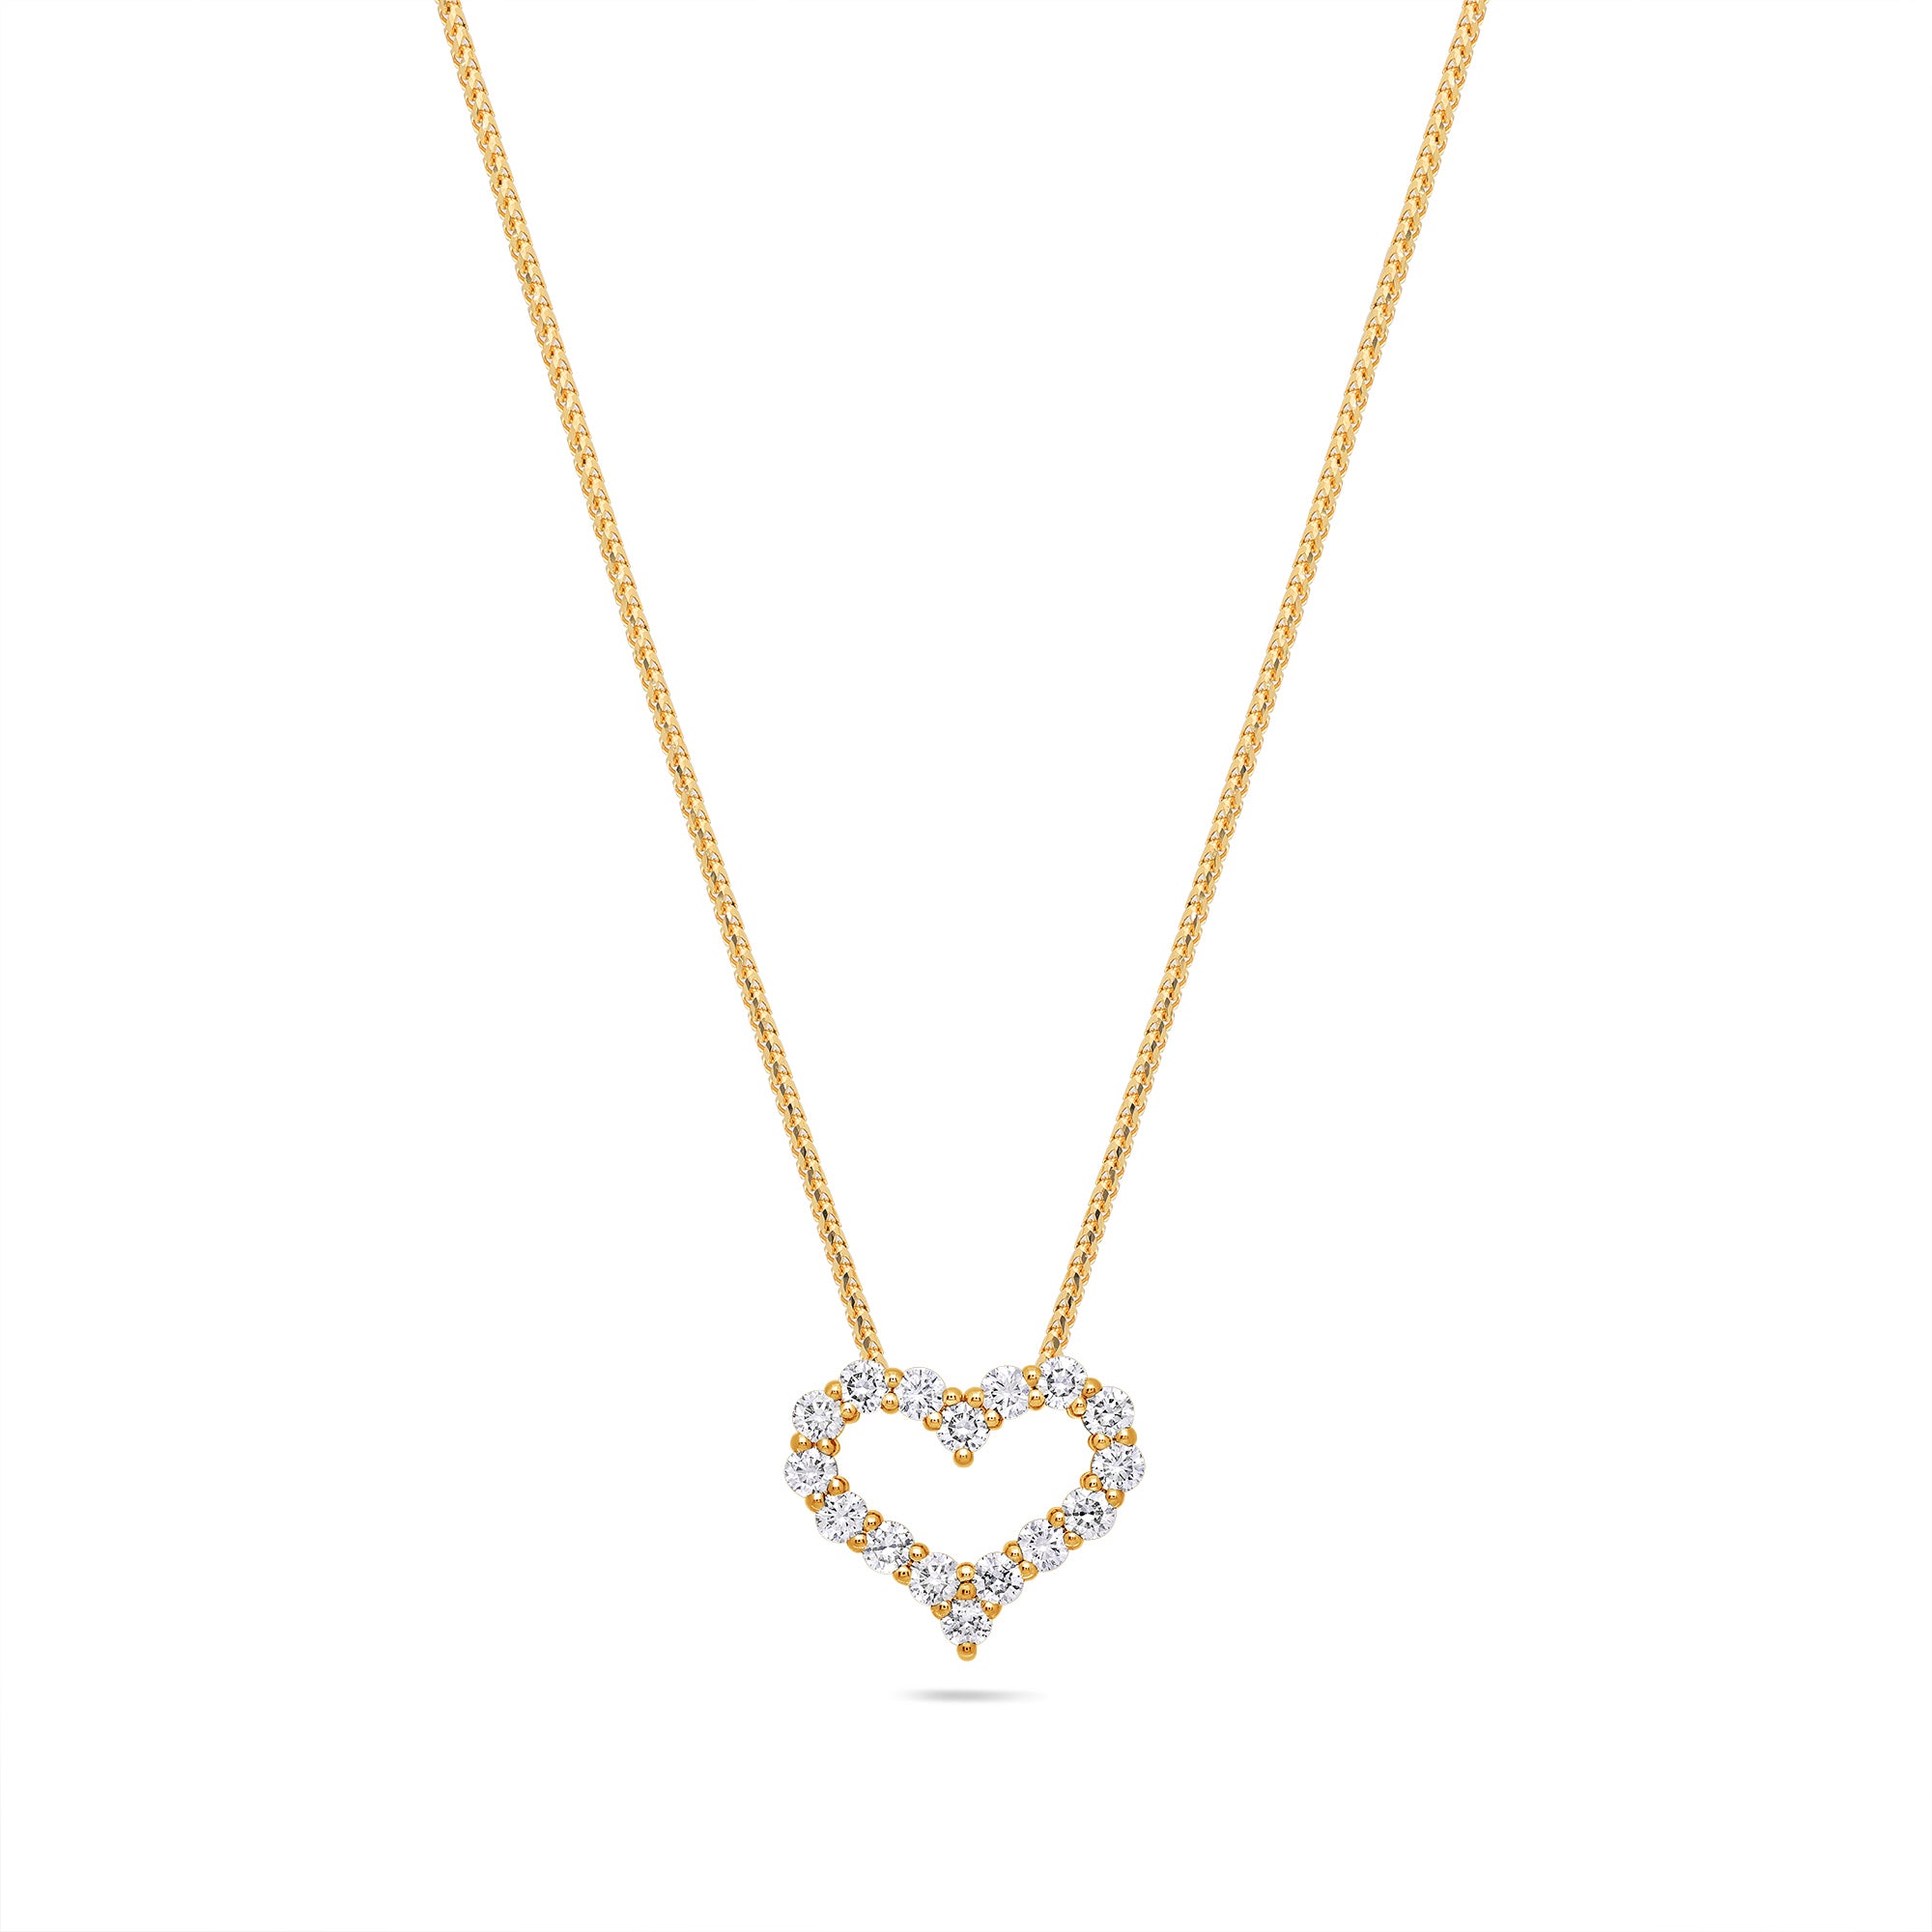 Milli Heart Necklace